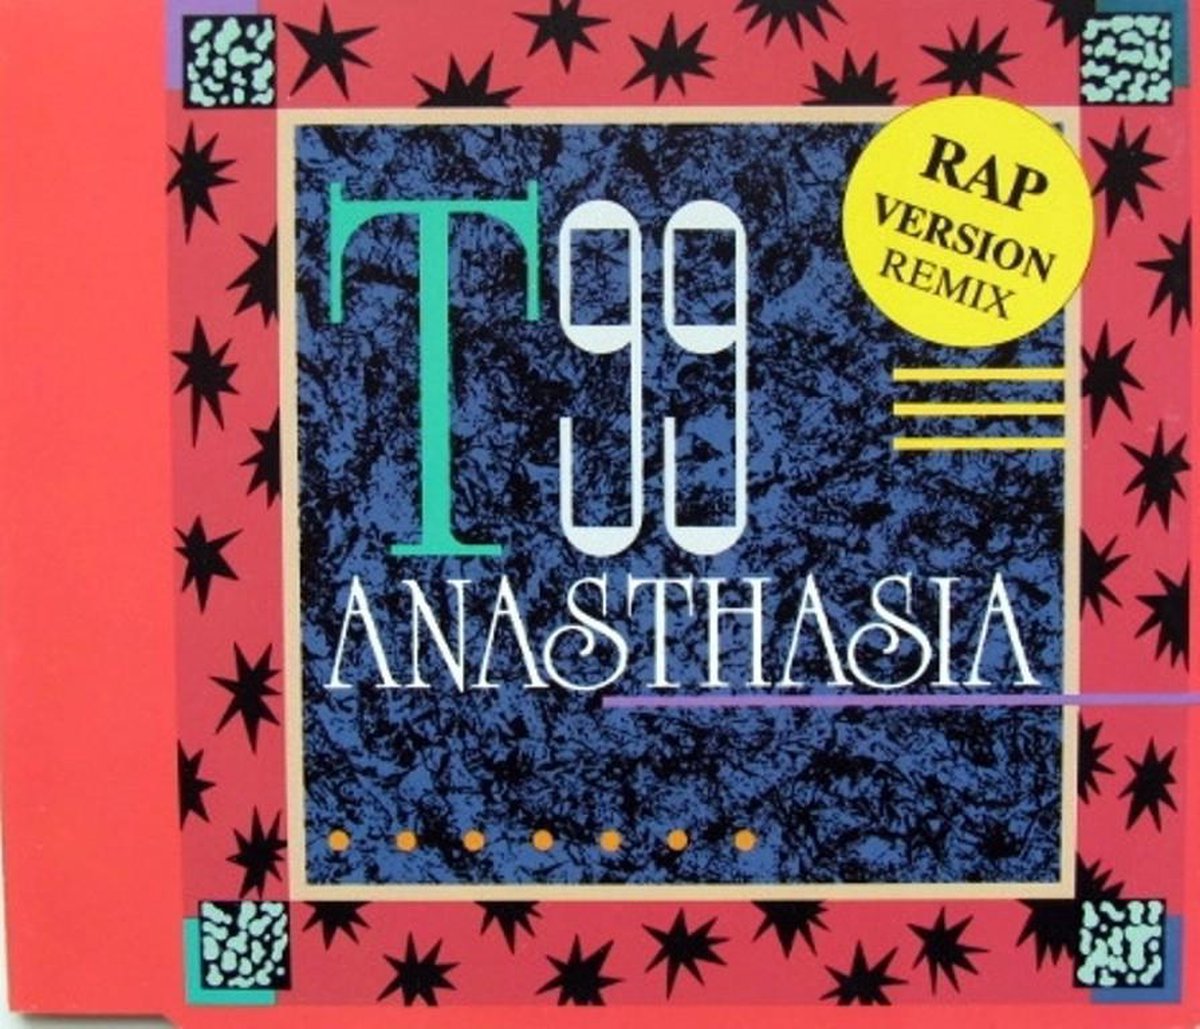 Anaesthesia [CD] - T99